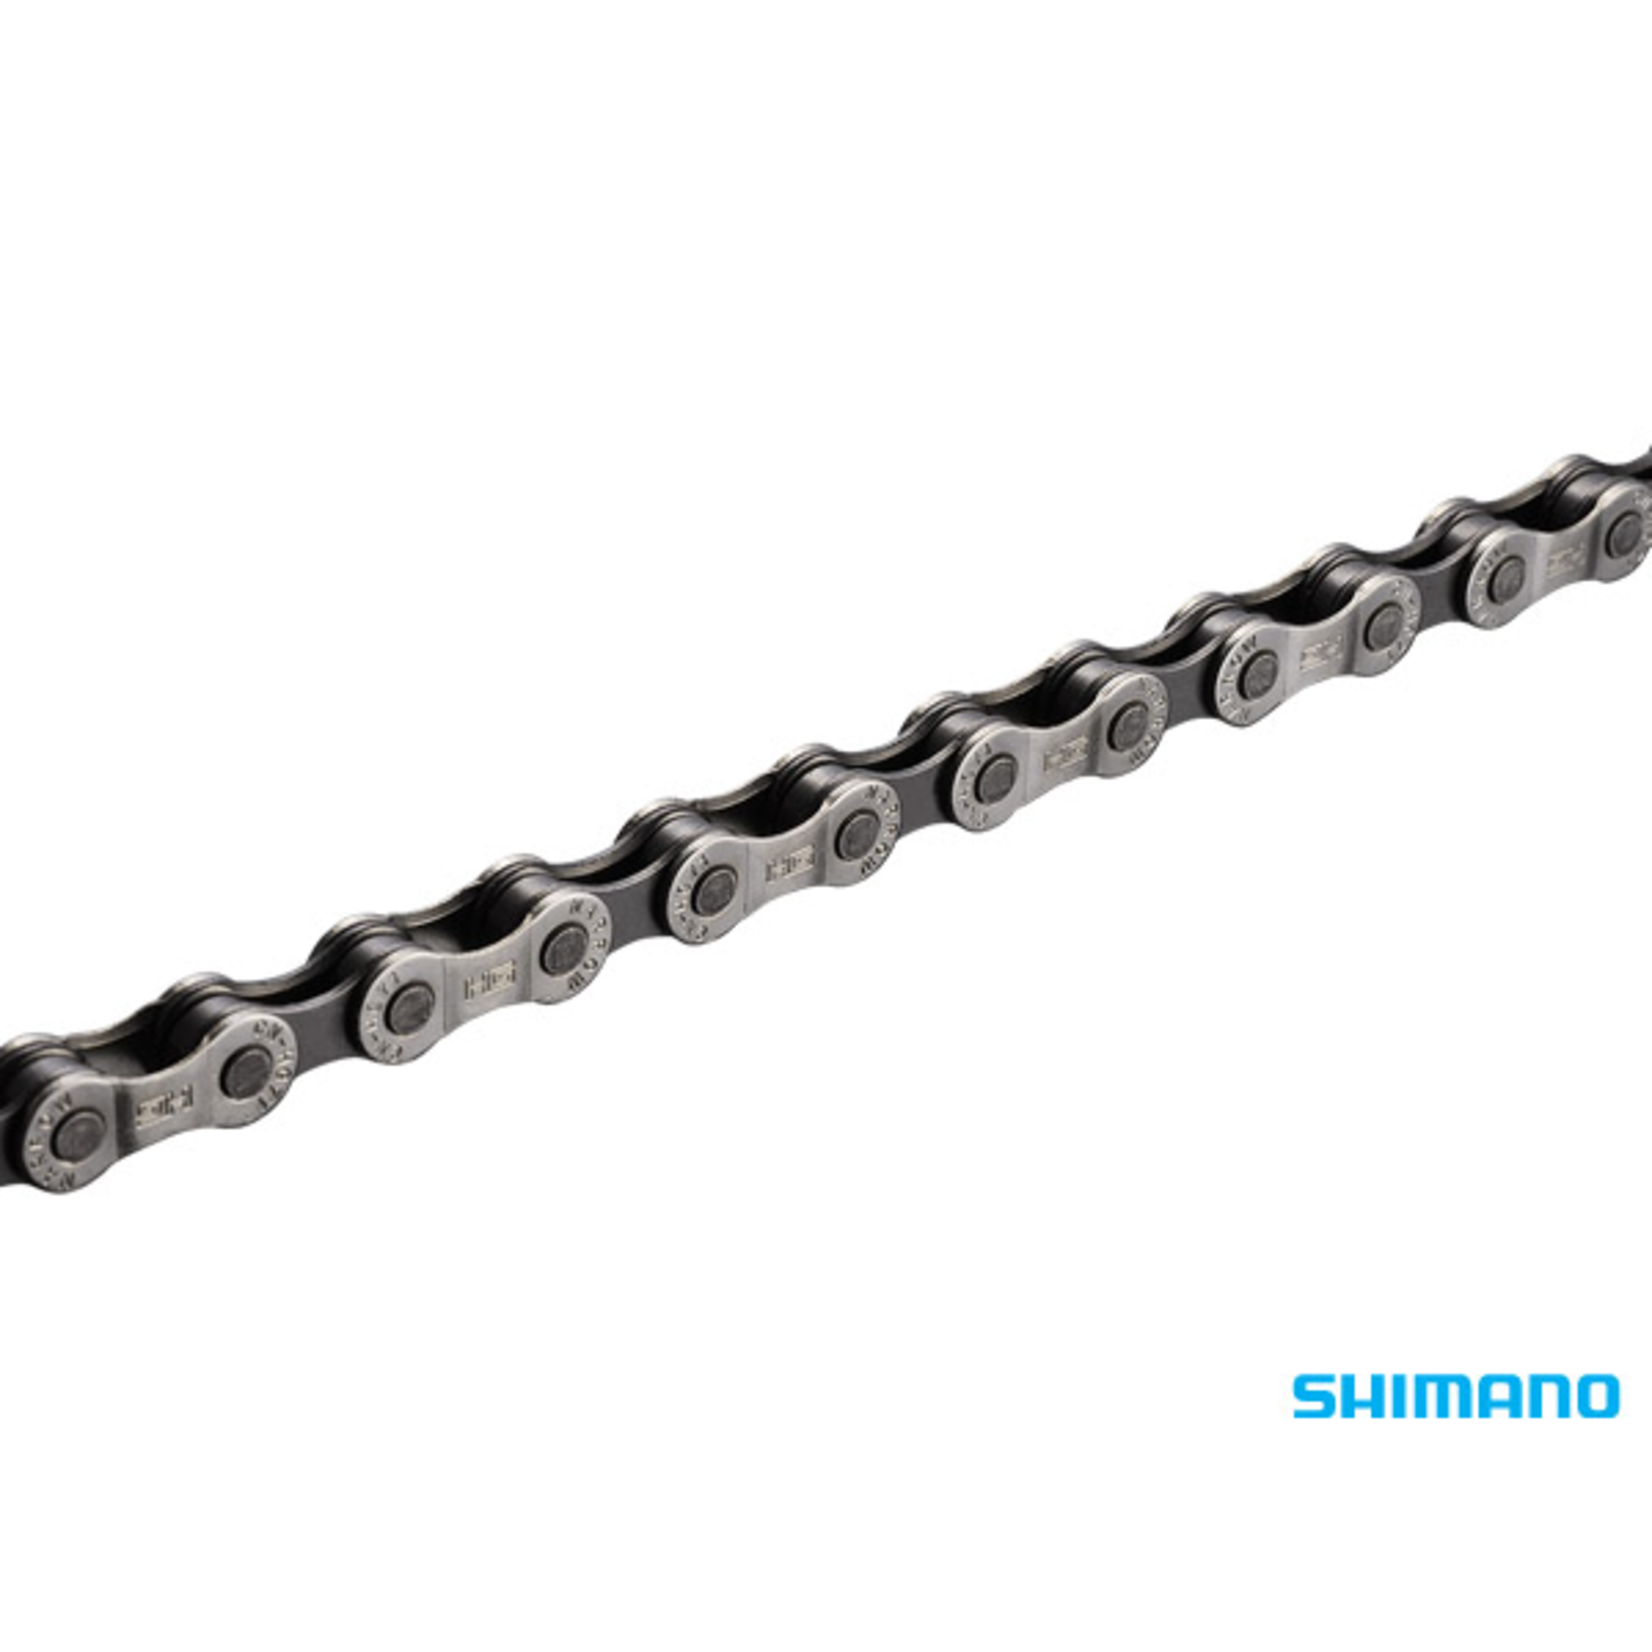 Shimano CN-M8100, DEORE XT, 126LINKS FOR HG 12-S